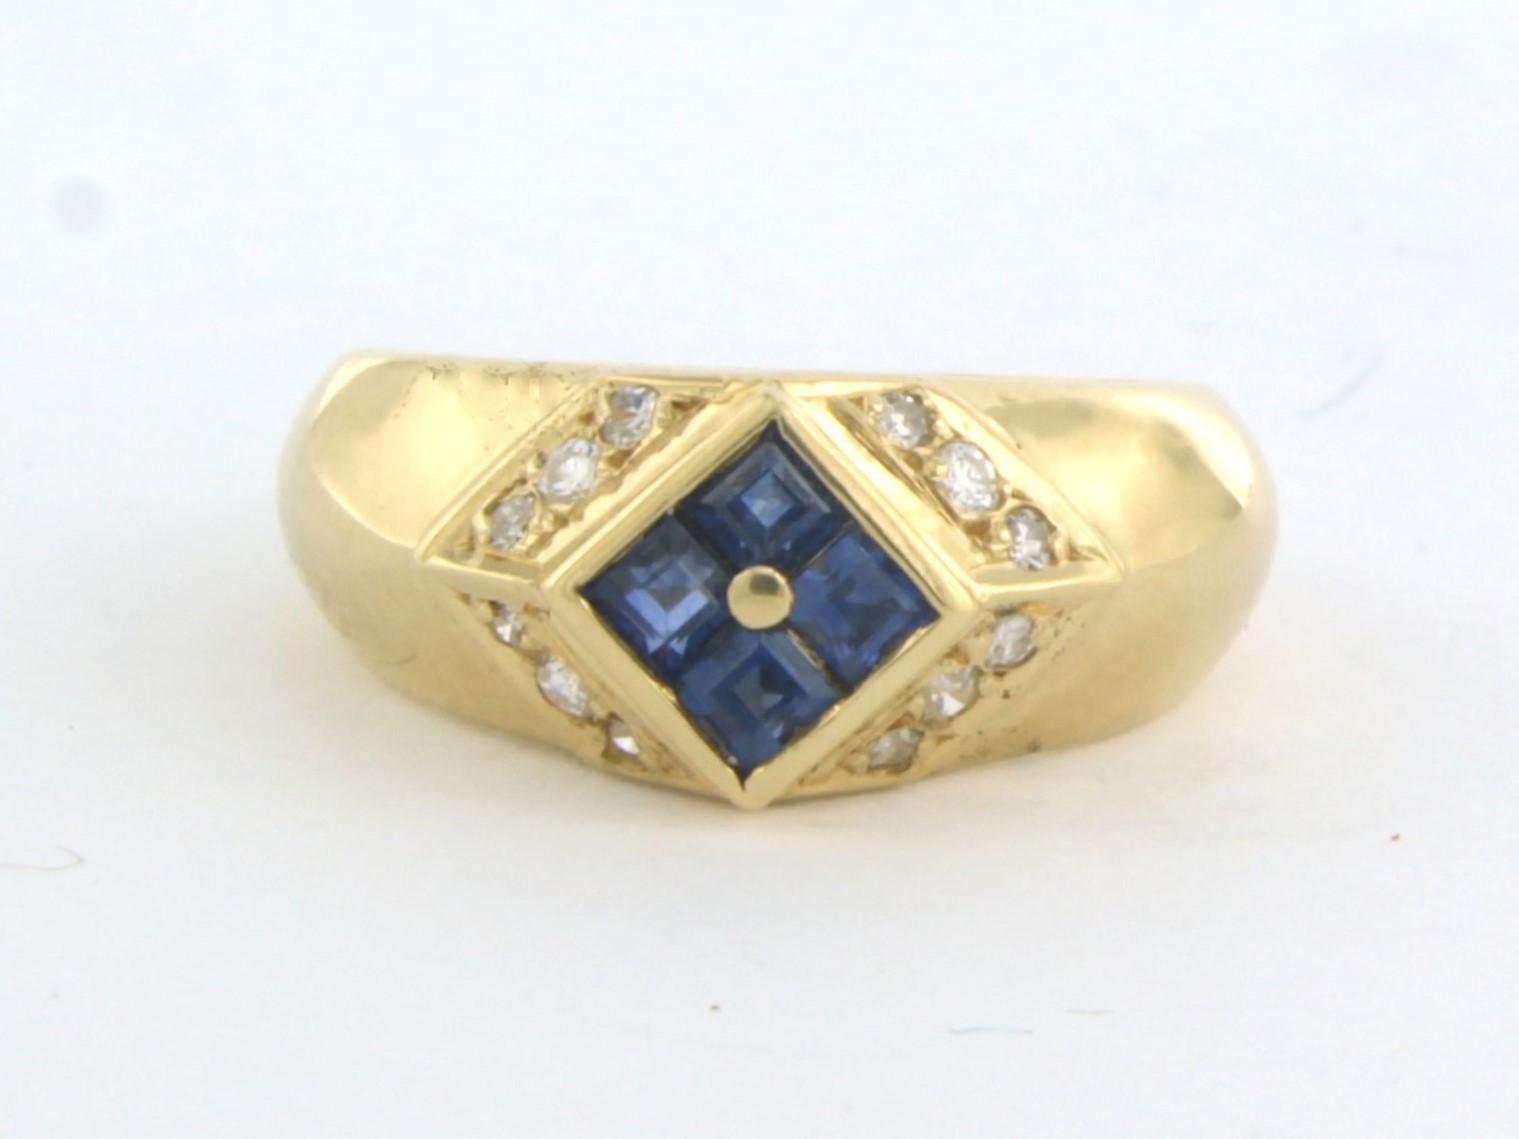 18 kt yellow gold ring set with sapphire and brilliant and single cut diamond 0.18 ct - F/G - SI - ring size U.S. 5.5 - EU. 16.25(51)

detailed description:

The top of the ring is 8.6 mm wide

weight: 4.9 grams

ring size U.S. 5.5 - EU. 16.25(51),